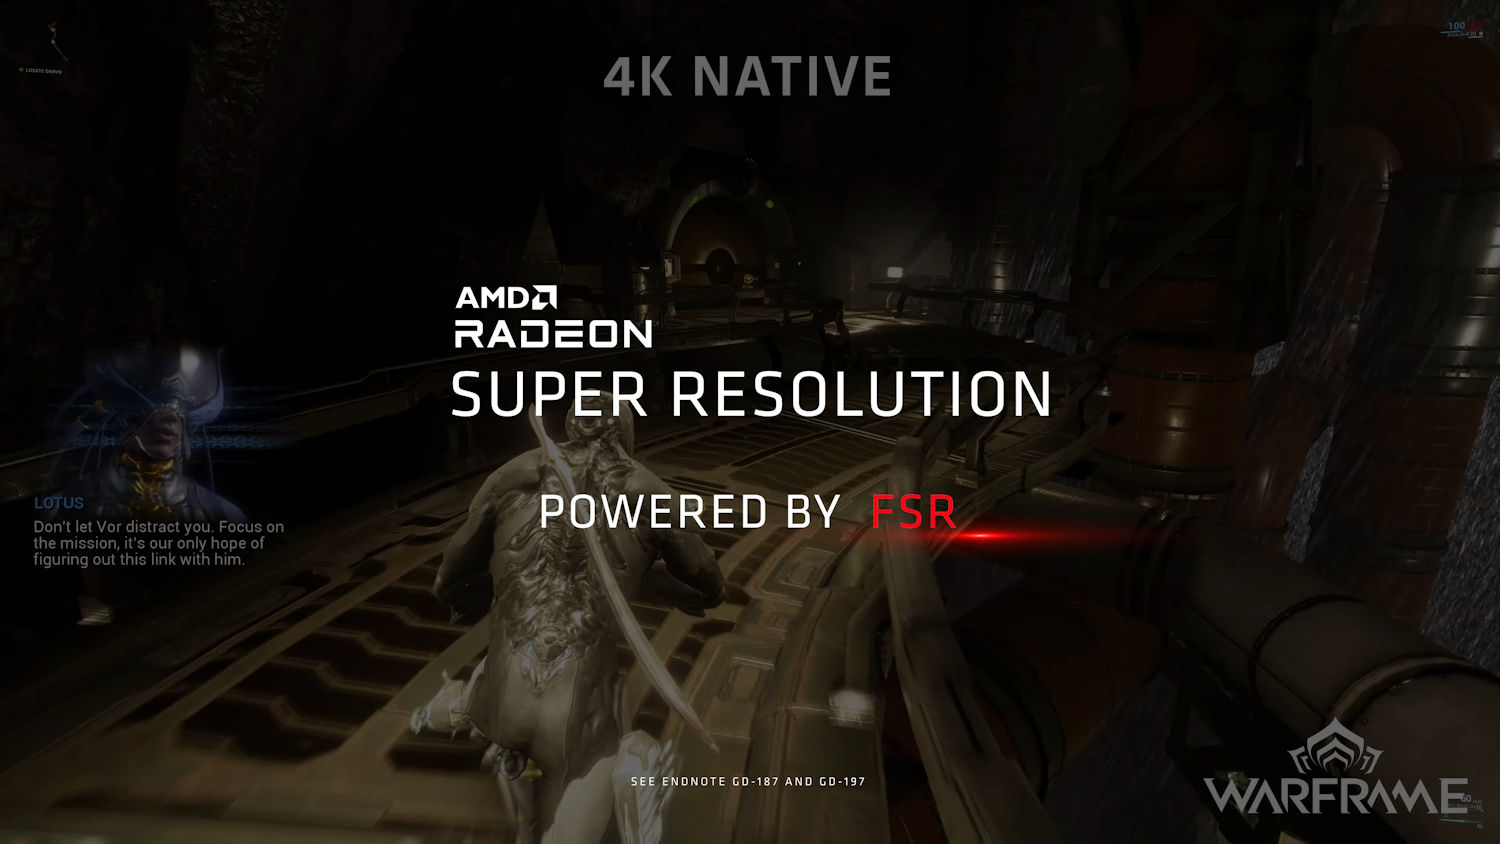 AMD Adrenalin 2022 FSR 3 AMD sneak peeks its upcoming Radeon Super Resolution with a new graphics driver 